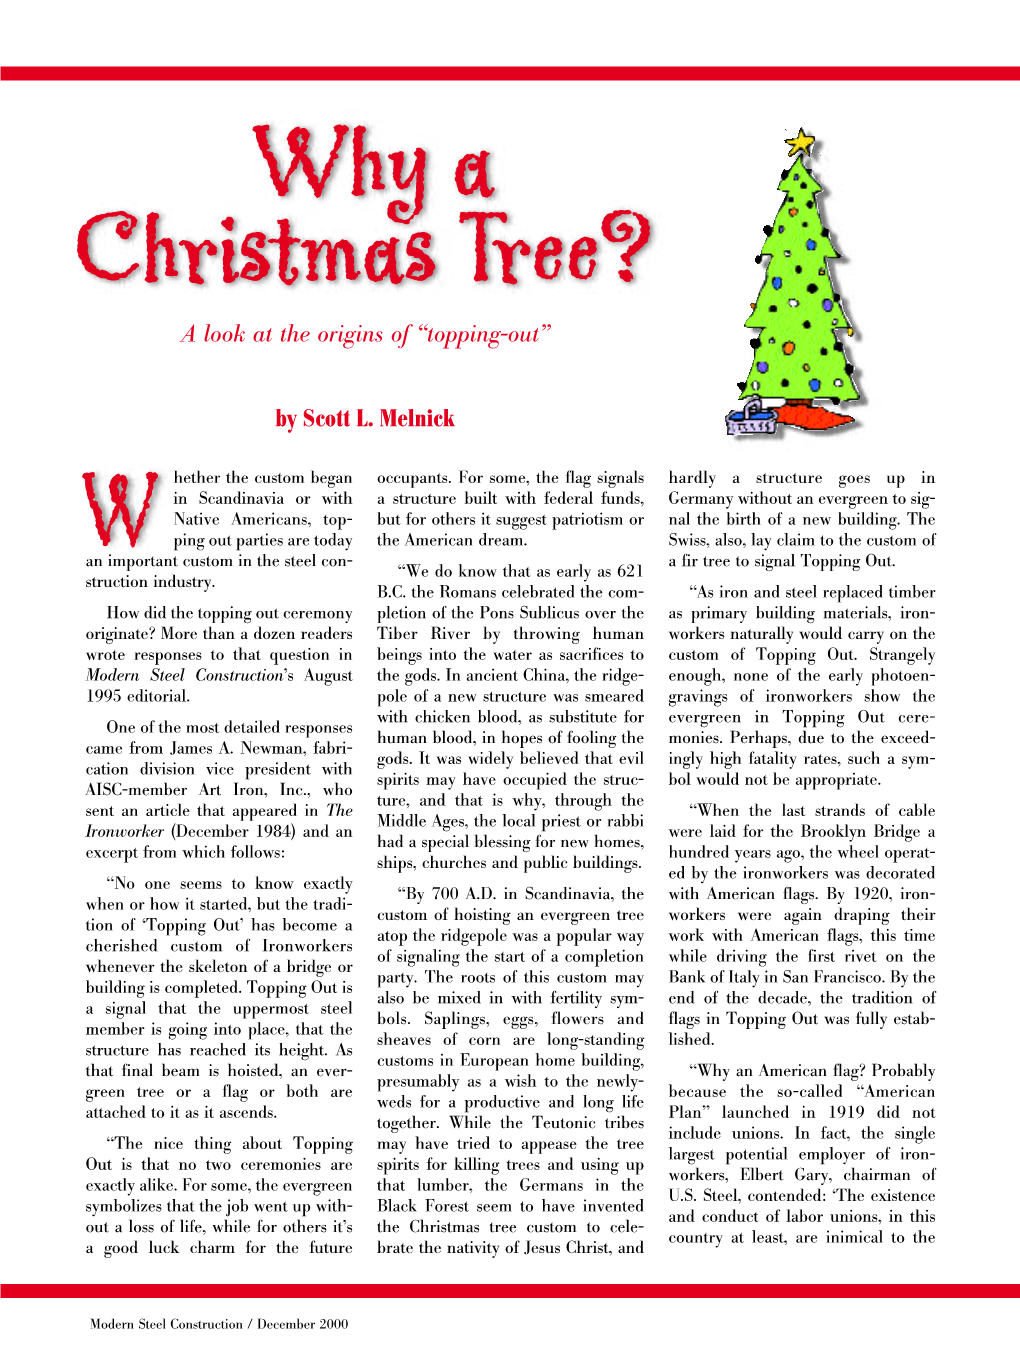 Why a Christmas Tree? a Look at the Origins of “Topping-Out”